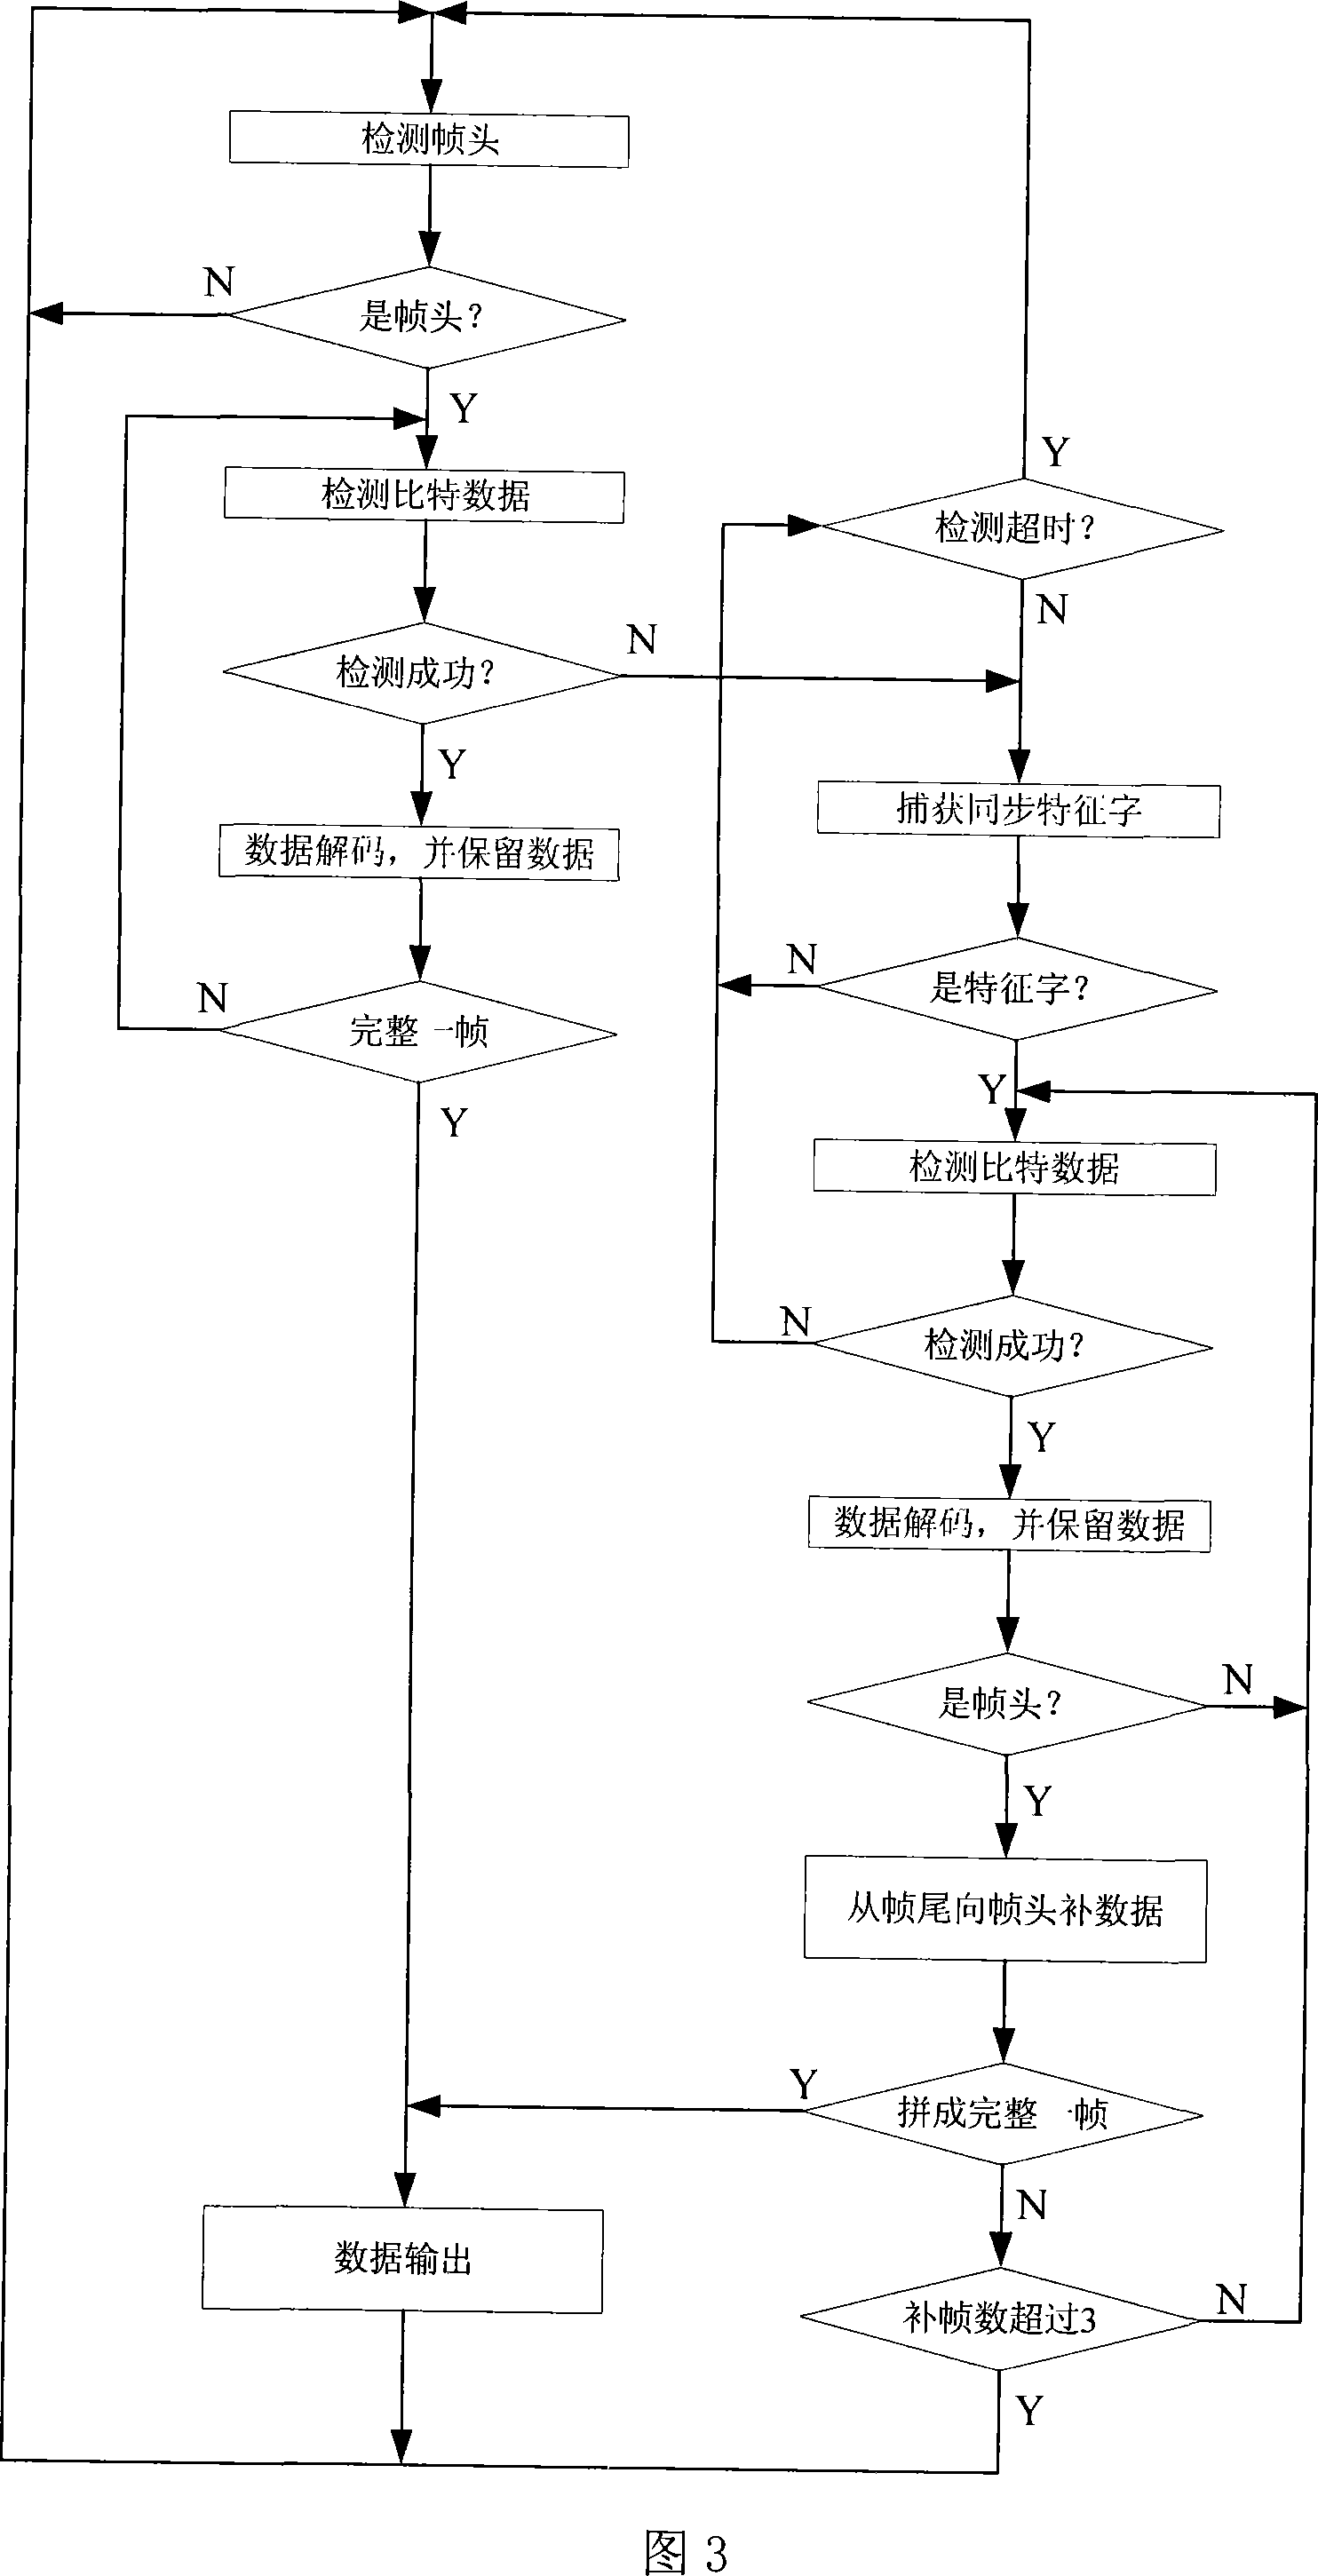 Method for identifying data of electronic label on truck in high speed